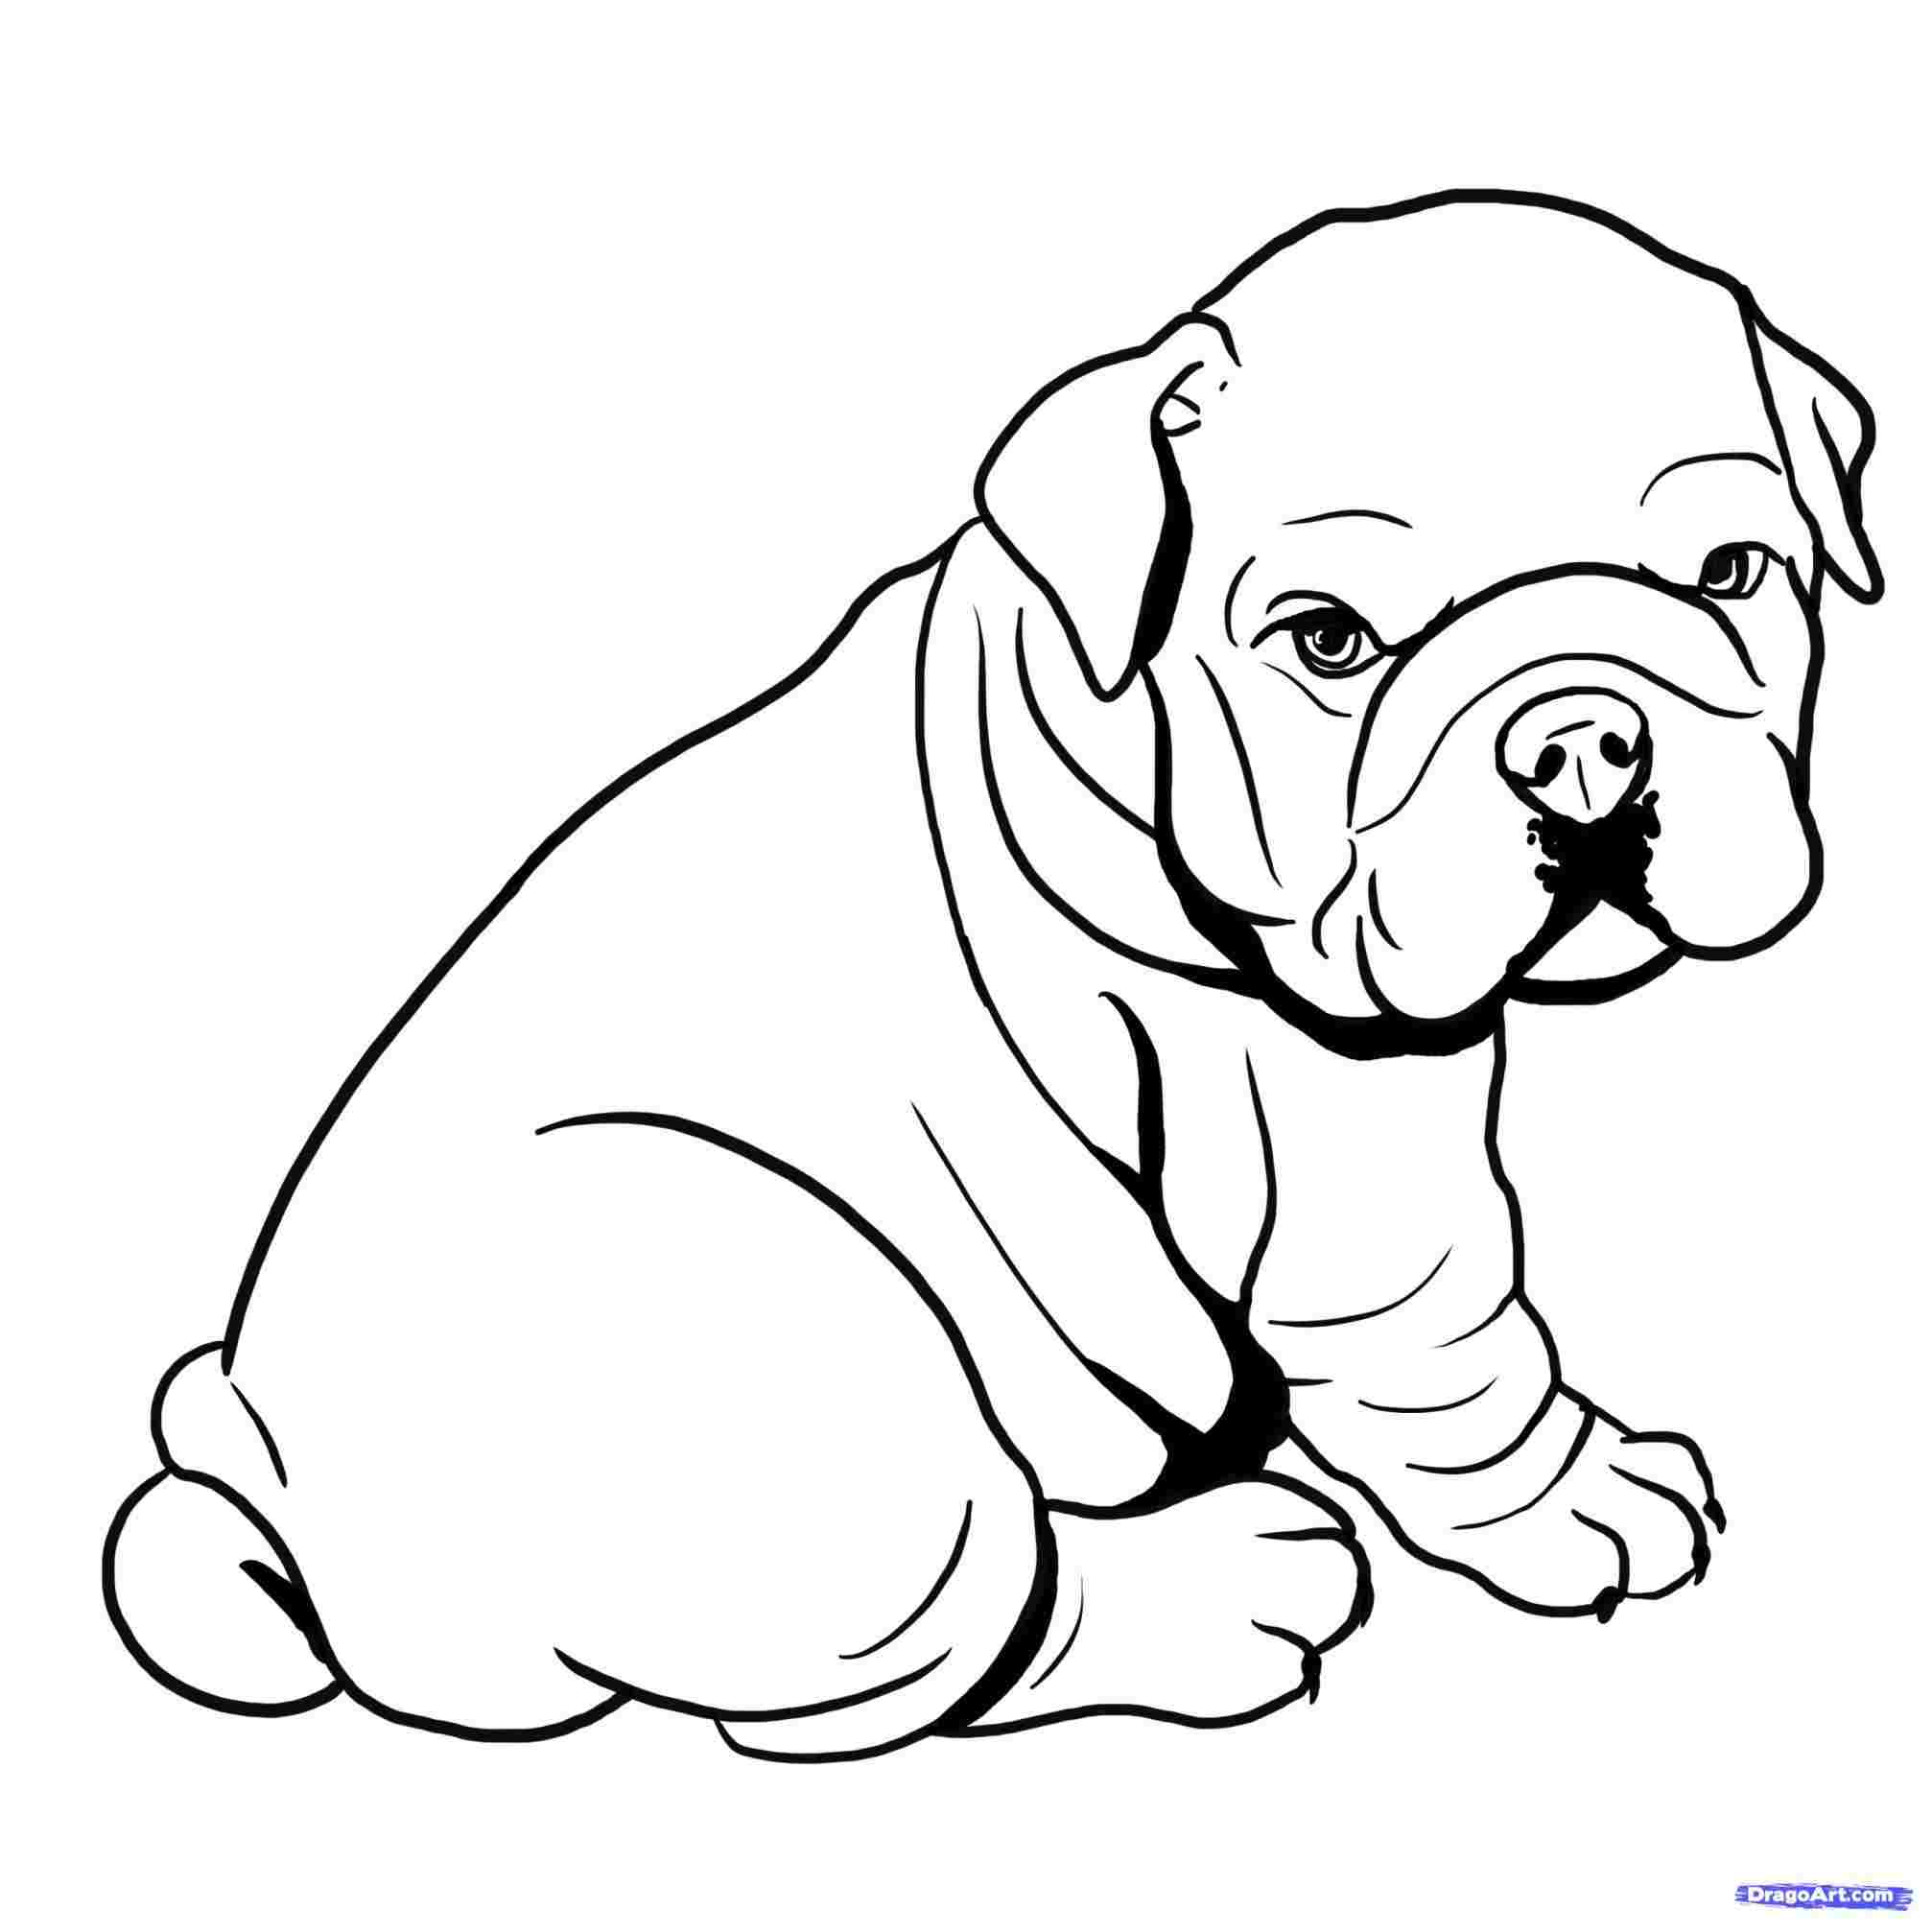 Dog Line Drawing Images